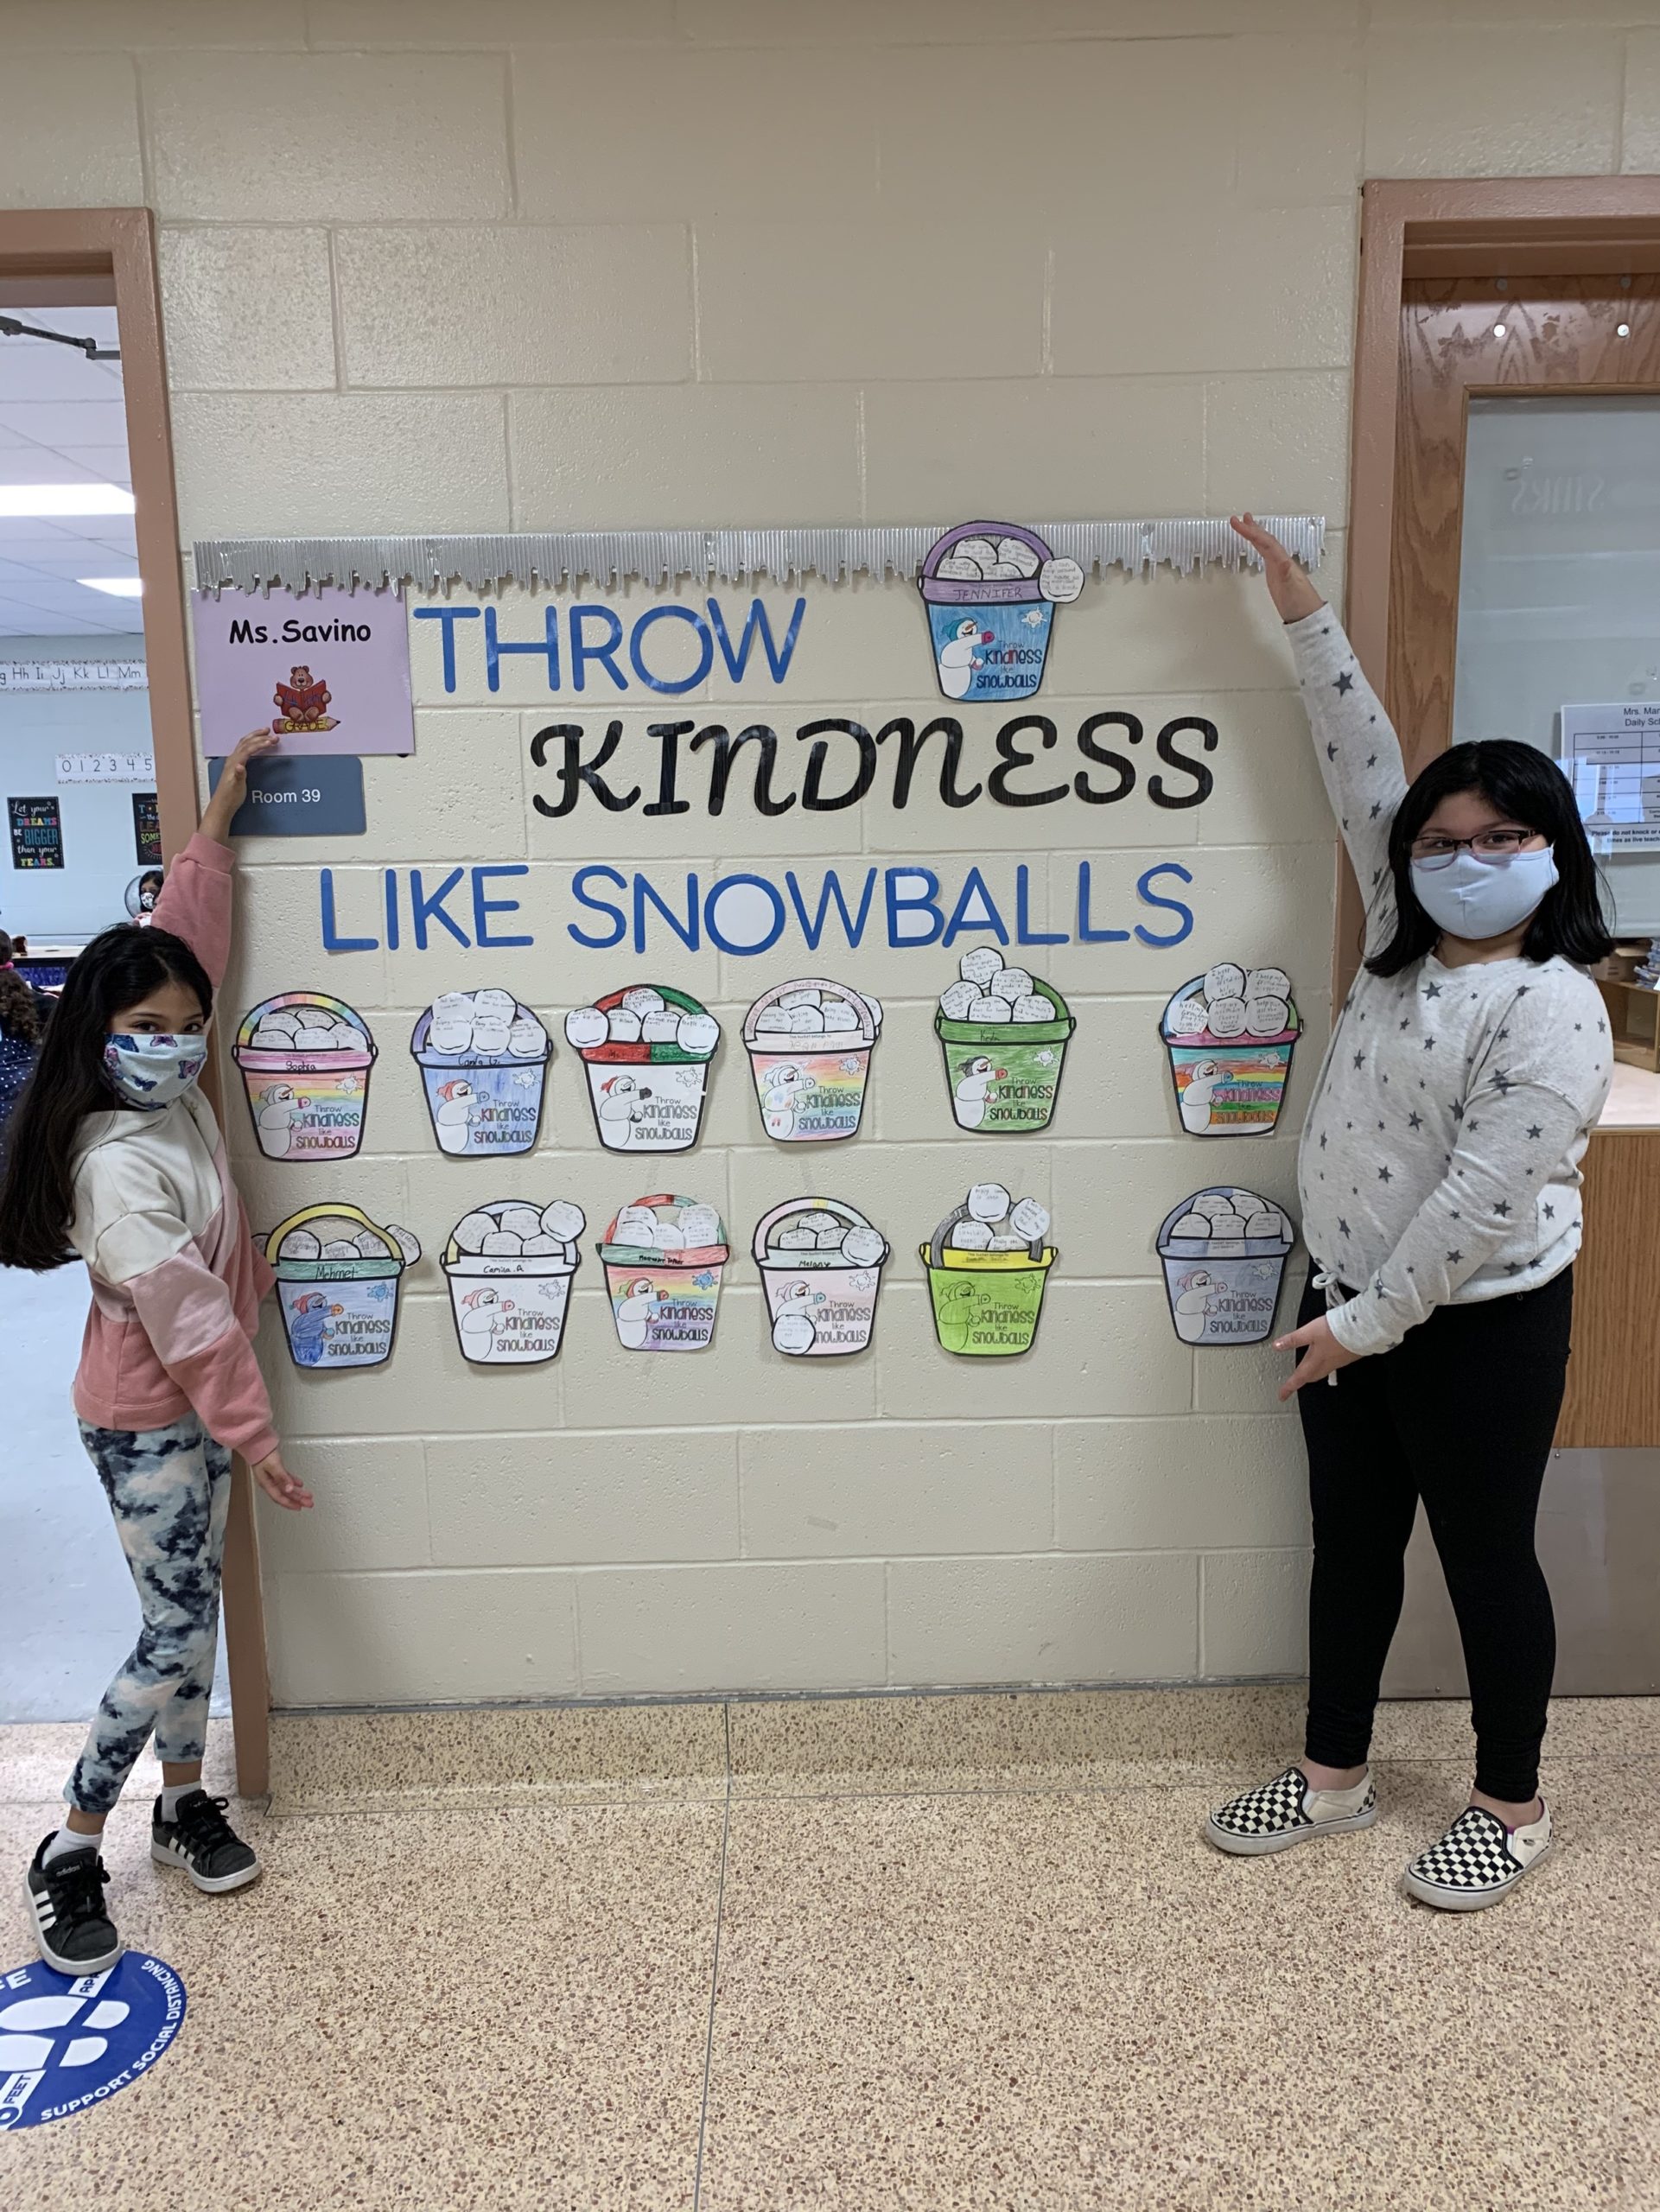 Krista Savino’s fourth graders at Hampton Bays Elementary School kicked off the new year with a kindness writing project. The students had a brainstorming session and listed ways they can treat others with kindness, as well as how helping someone else makes them feel better. Their work is displayed in the school’s fourth grade hallway.